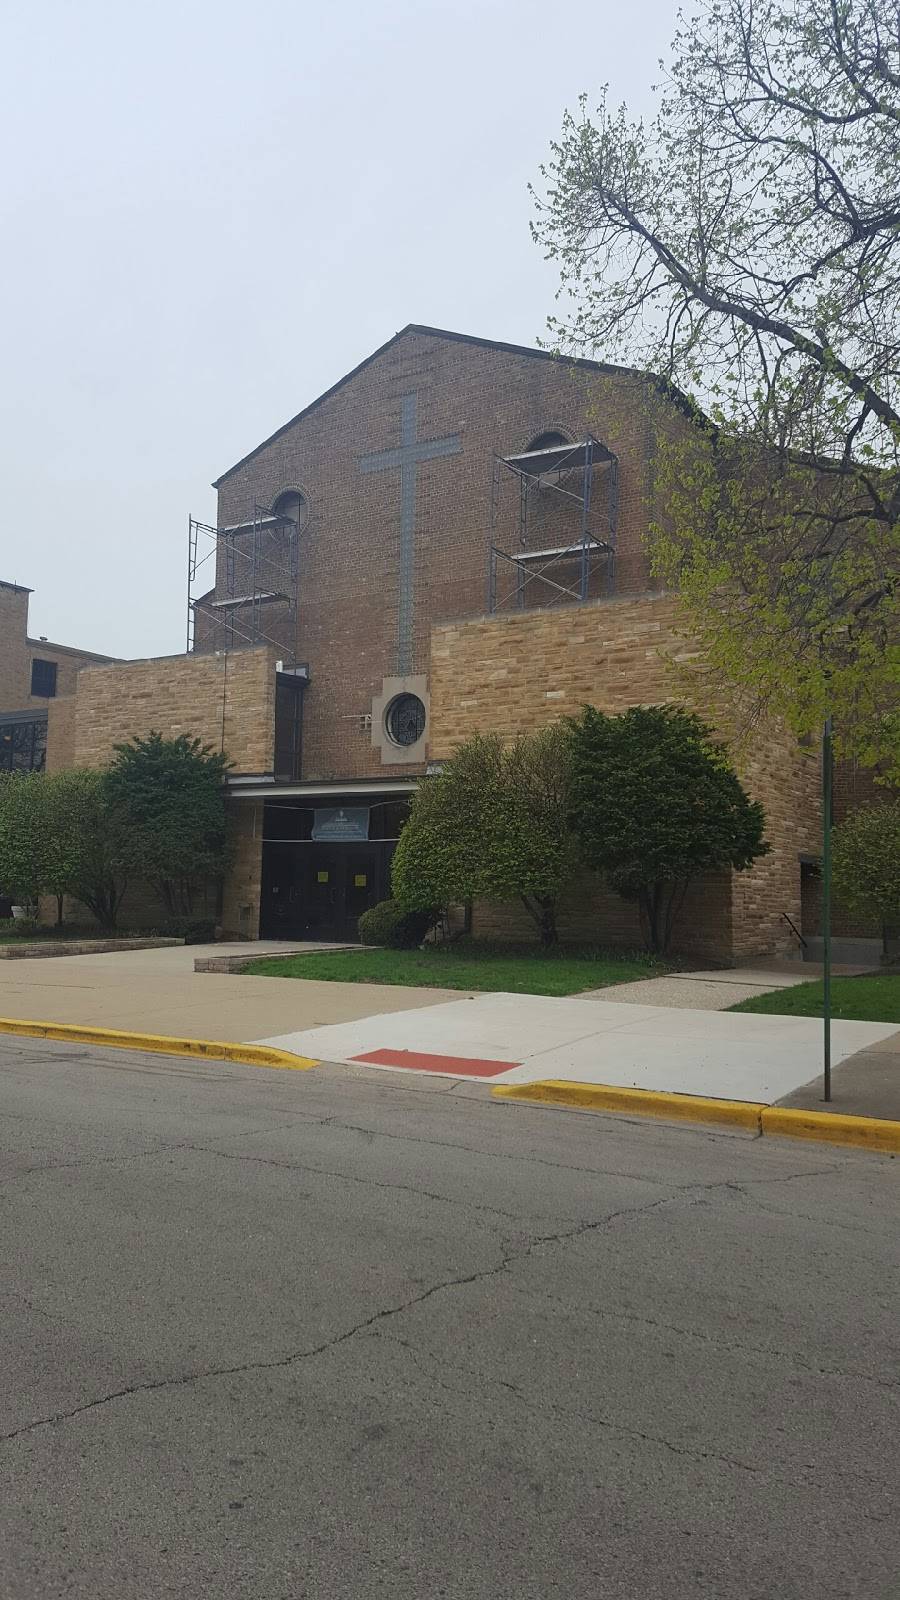 Our Lady of Charity School | 3620 S 57th Ct, Cicero, IL 60804, USA | Phone: (708) 652-0262